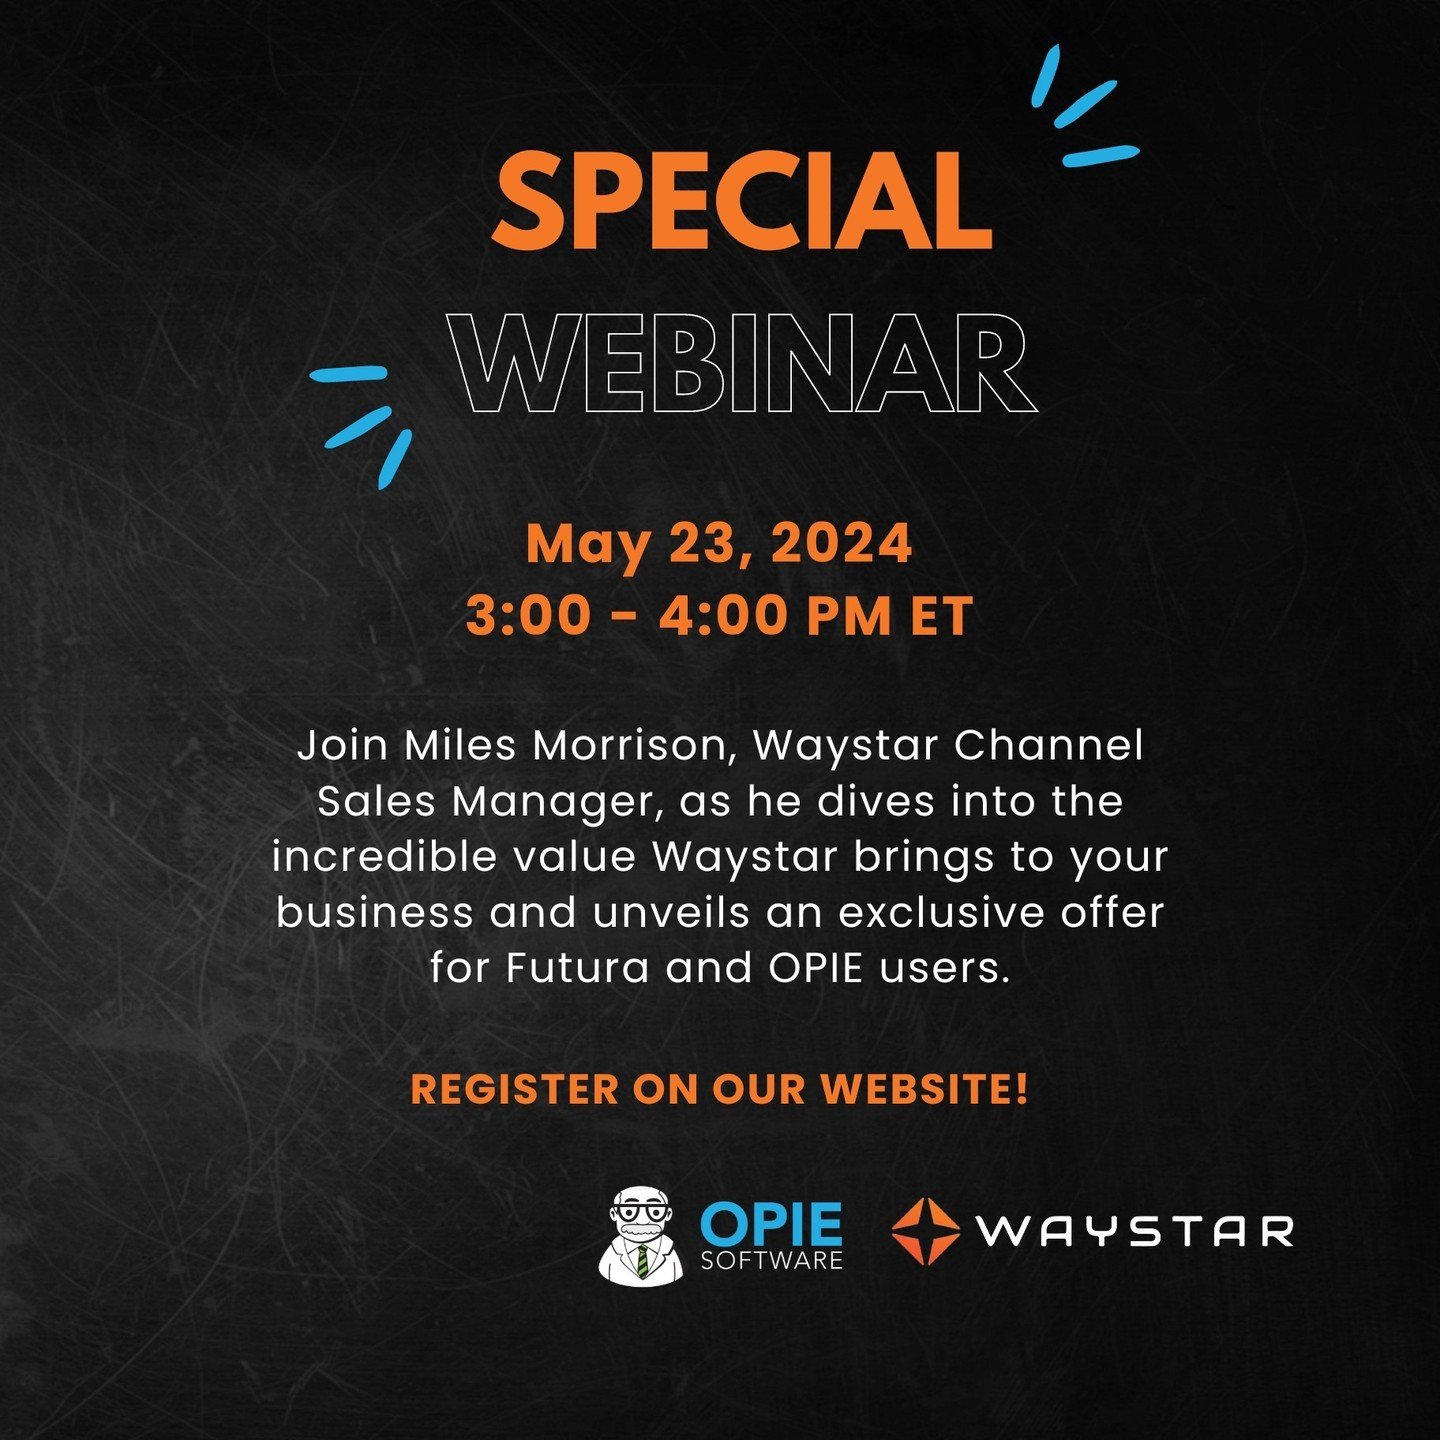 Just In! Special Offer Alert from Waystar! 🎉 

Join Miles Morrison, Waystar Channel Sales Manager, as he dives into the incredible value Waystar brings to your business and unveils an exclusive offer for Futura and OPIE users.

✨ Discover Why Waysta